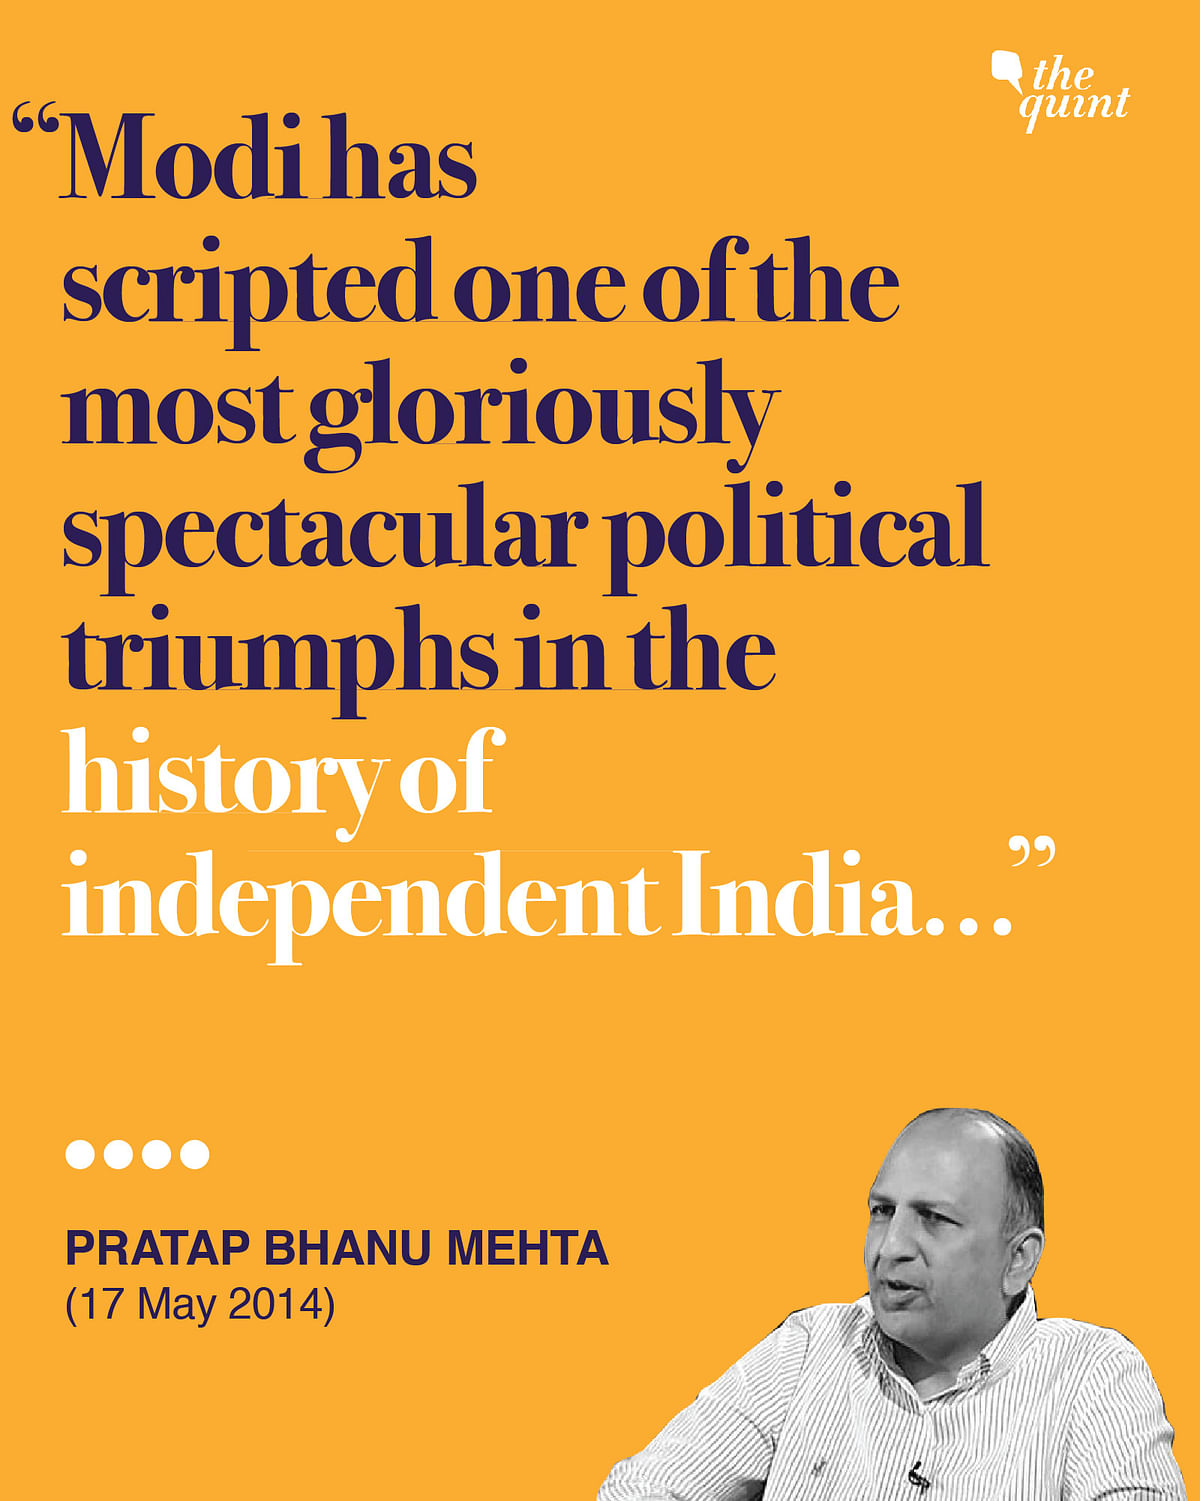 The so-called Lutyens’ Delhi cabal brought Modi to power, and they could be the ones to oust him, says Raghav Bahl.